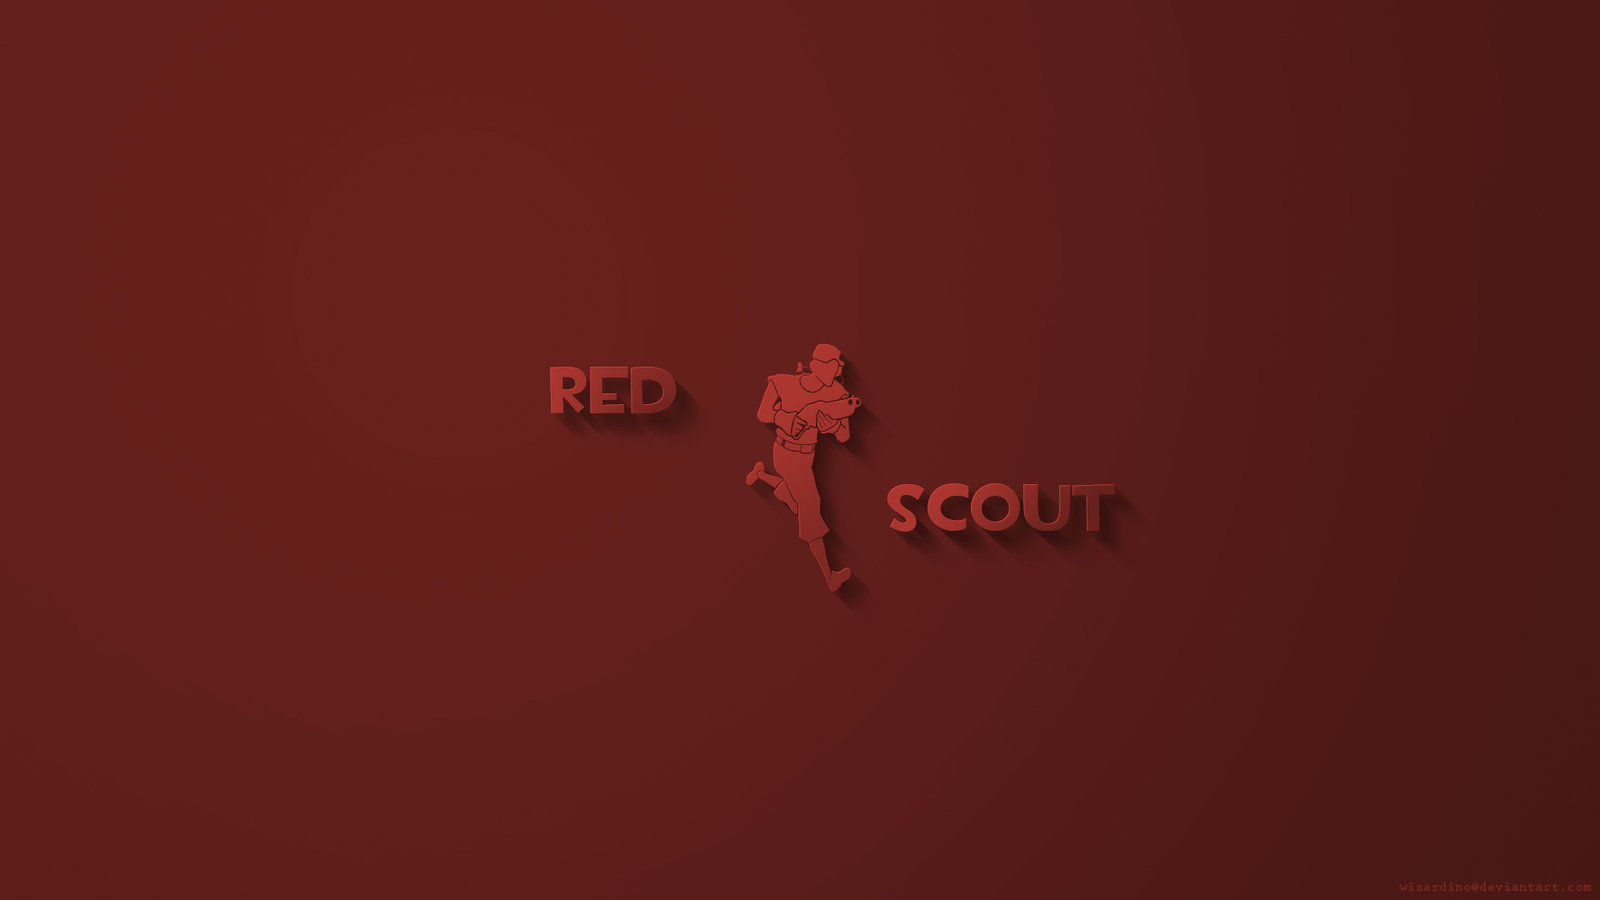 Tf2 Red Scout Wallpaper By Wizardino